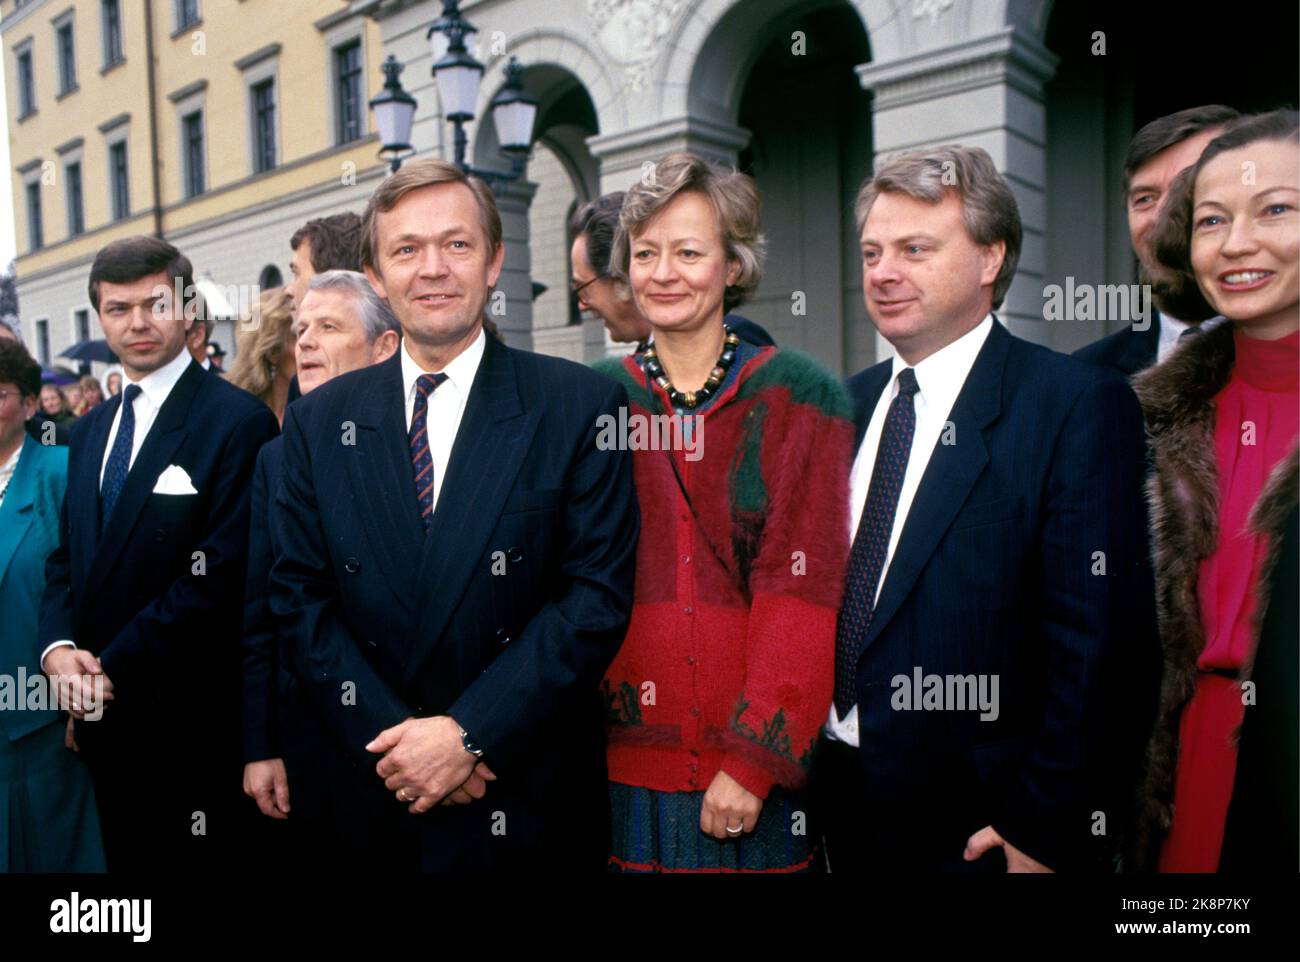 Oslo 19901103: The departure of the Syse government photographed in front of the castle. The government consists of the Right, Christian People's Party and the Center Party. From left Kjell Magne Bondevik (KrF), Johan Jakobsen (Sp), Else Bugge Fougner (H), Arne Skauge (H) and Kaci Kullmann Five (H). Photo: Ingar Johansen Scanfoto / NTB Stock Photo